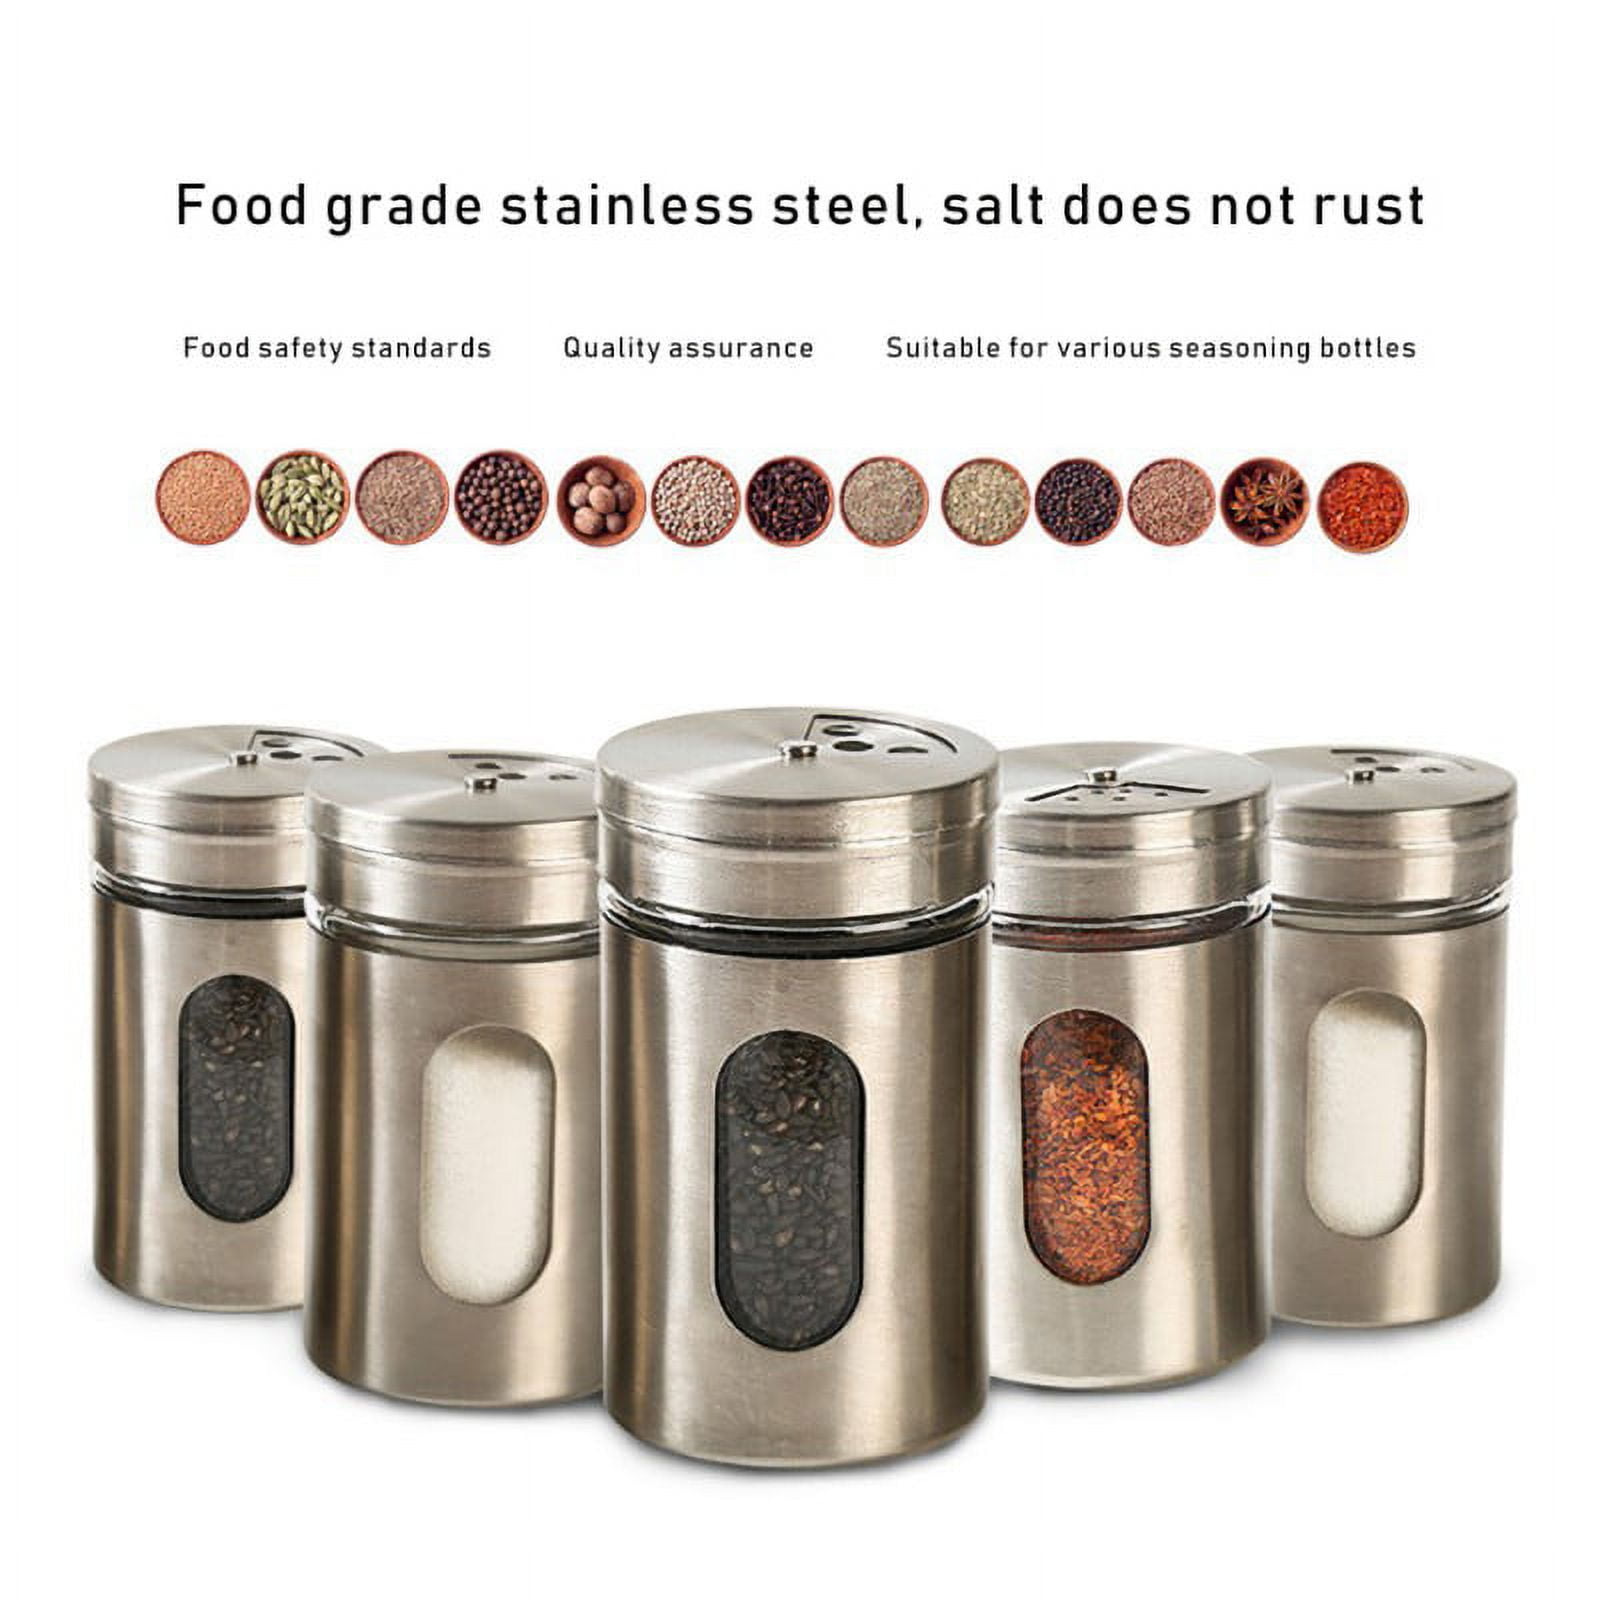  Pinnacle Mercantile 2 oz Glass Jars Containers Spice Straight  Sided with White Metal Lids 24 ct case: Home & Kitchen